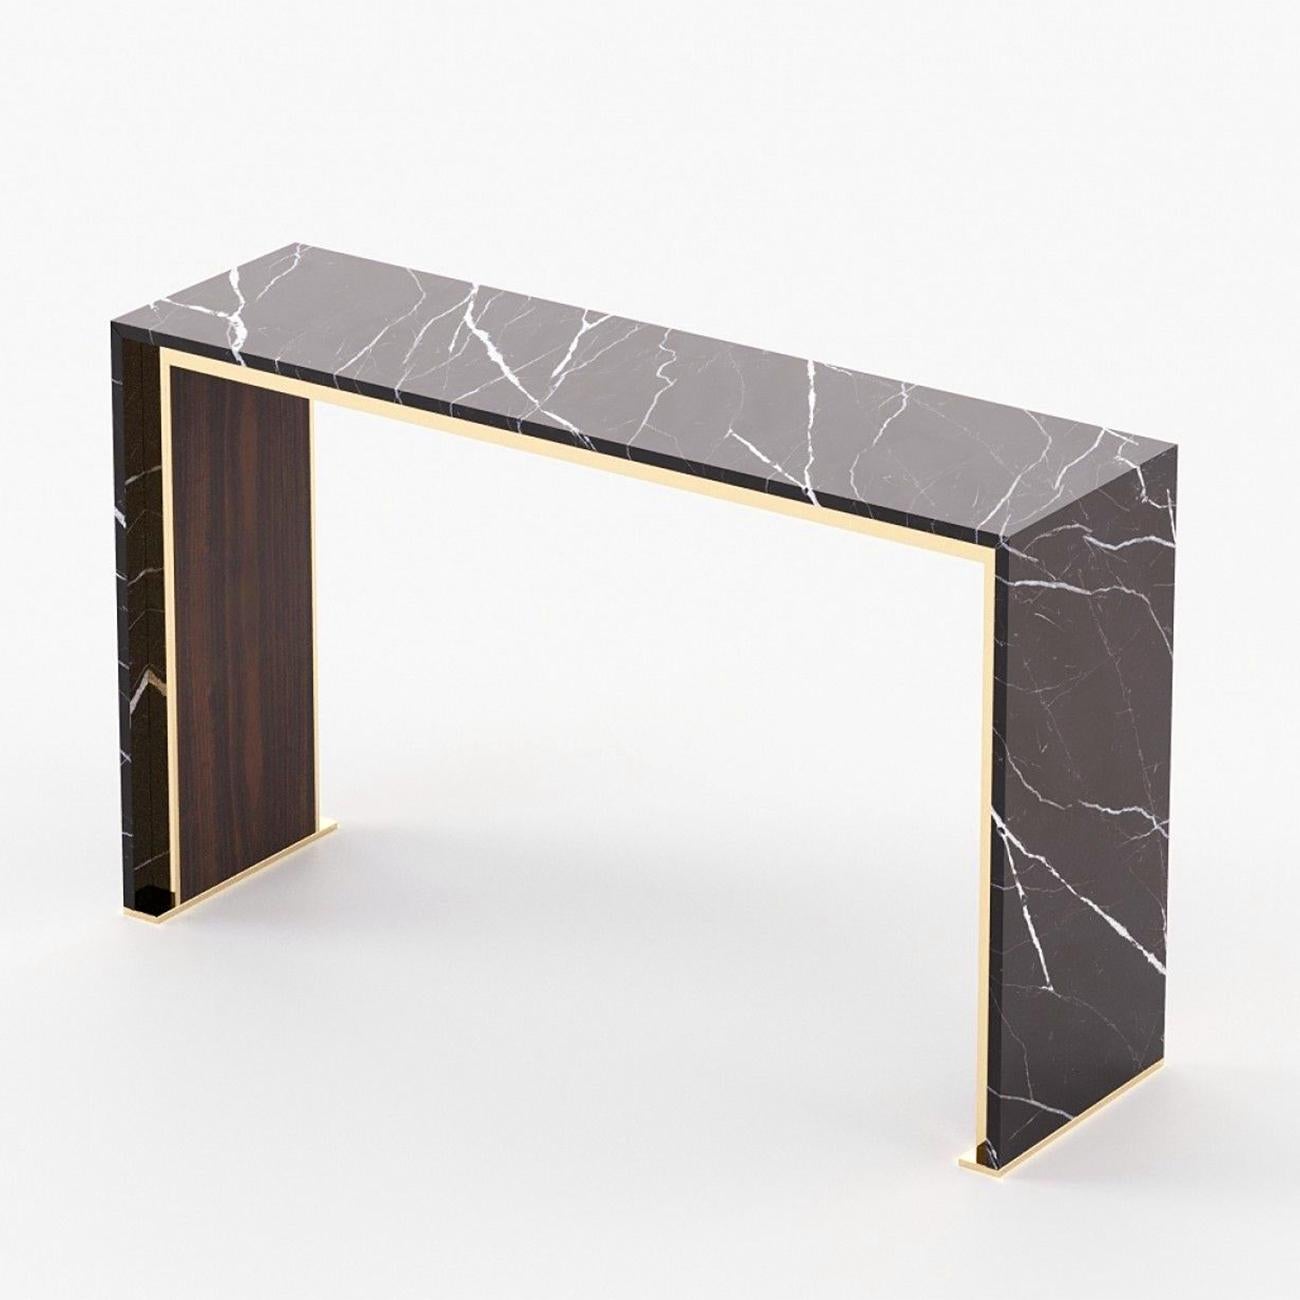 Console table Agustia with structure in smocked eucalyptus veneered 
in matte finish and in polished black marquina marble. With polished 
stainless steel trim in gold finish.
Also available in ebony matte finish, or grey oak matte finish,
or